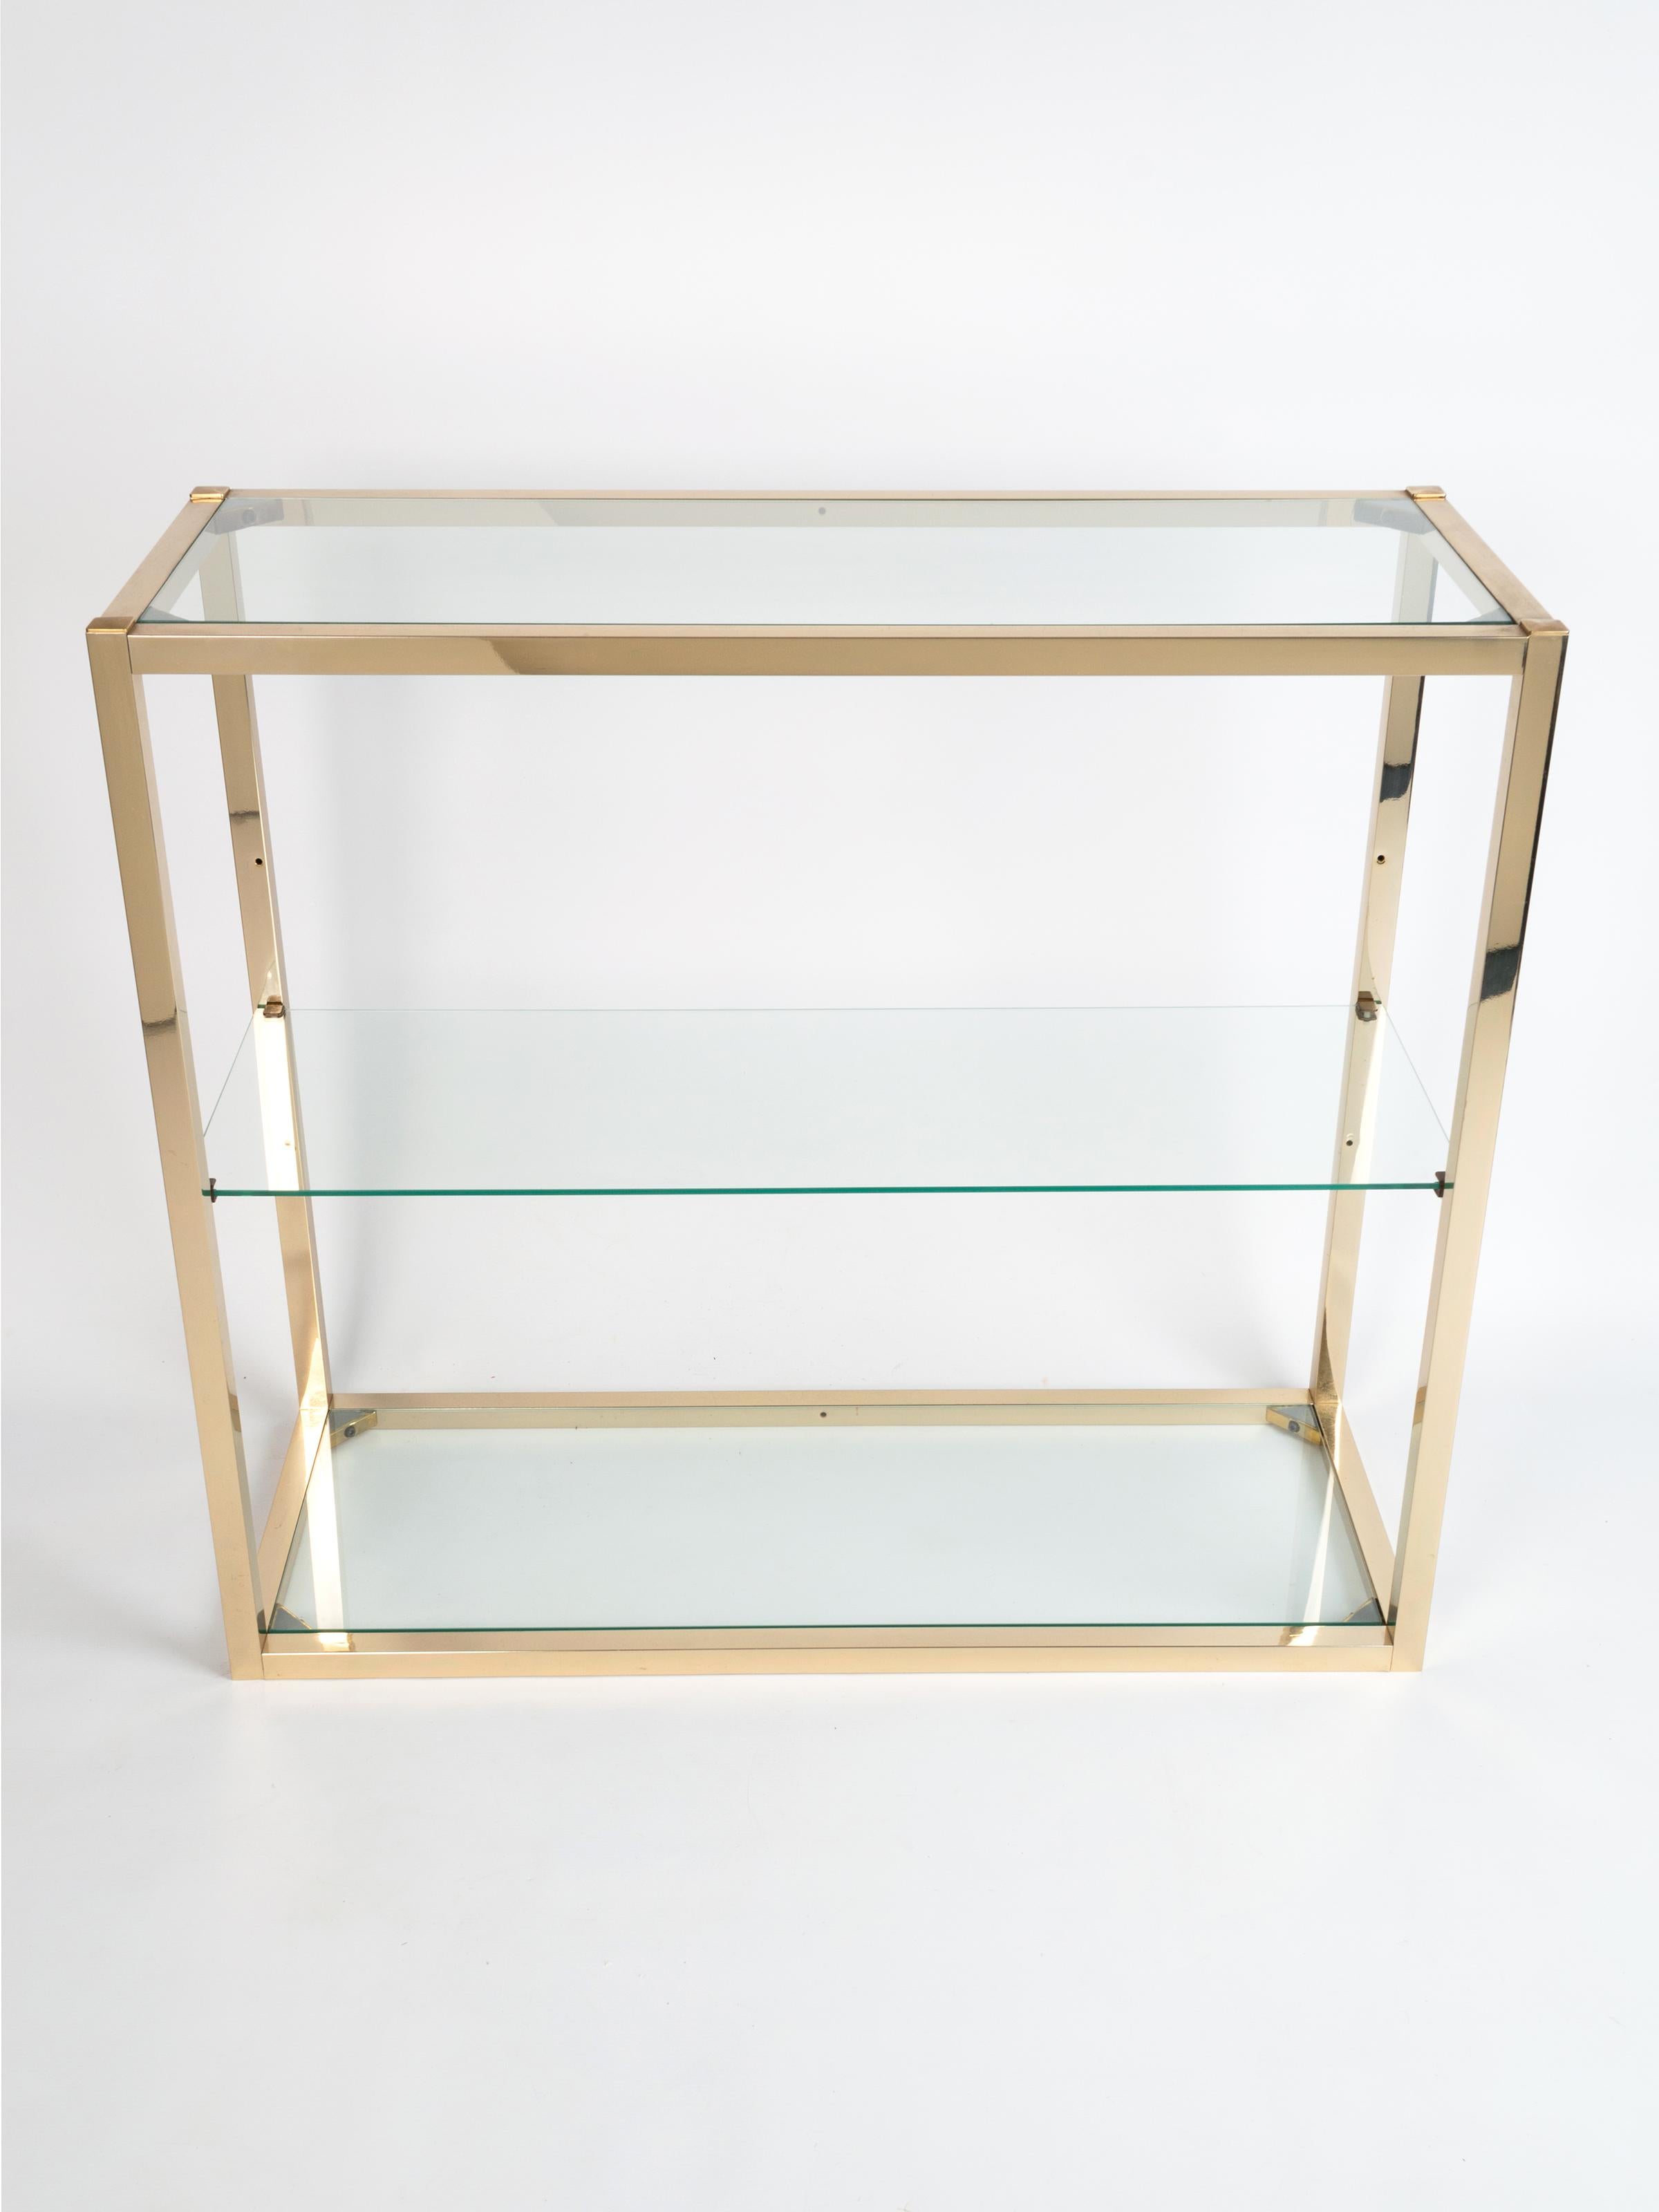 Romeo Rega Gold Plated Brass Etagere Shelving Console, Italy, C.1960 For Sale 1